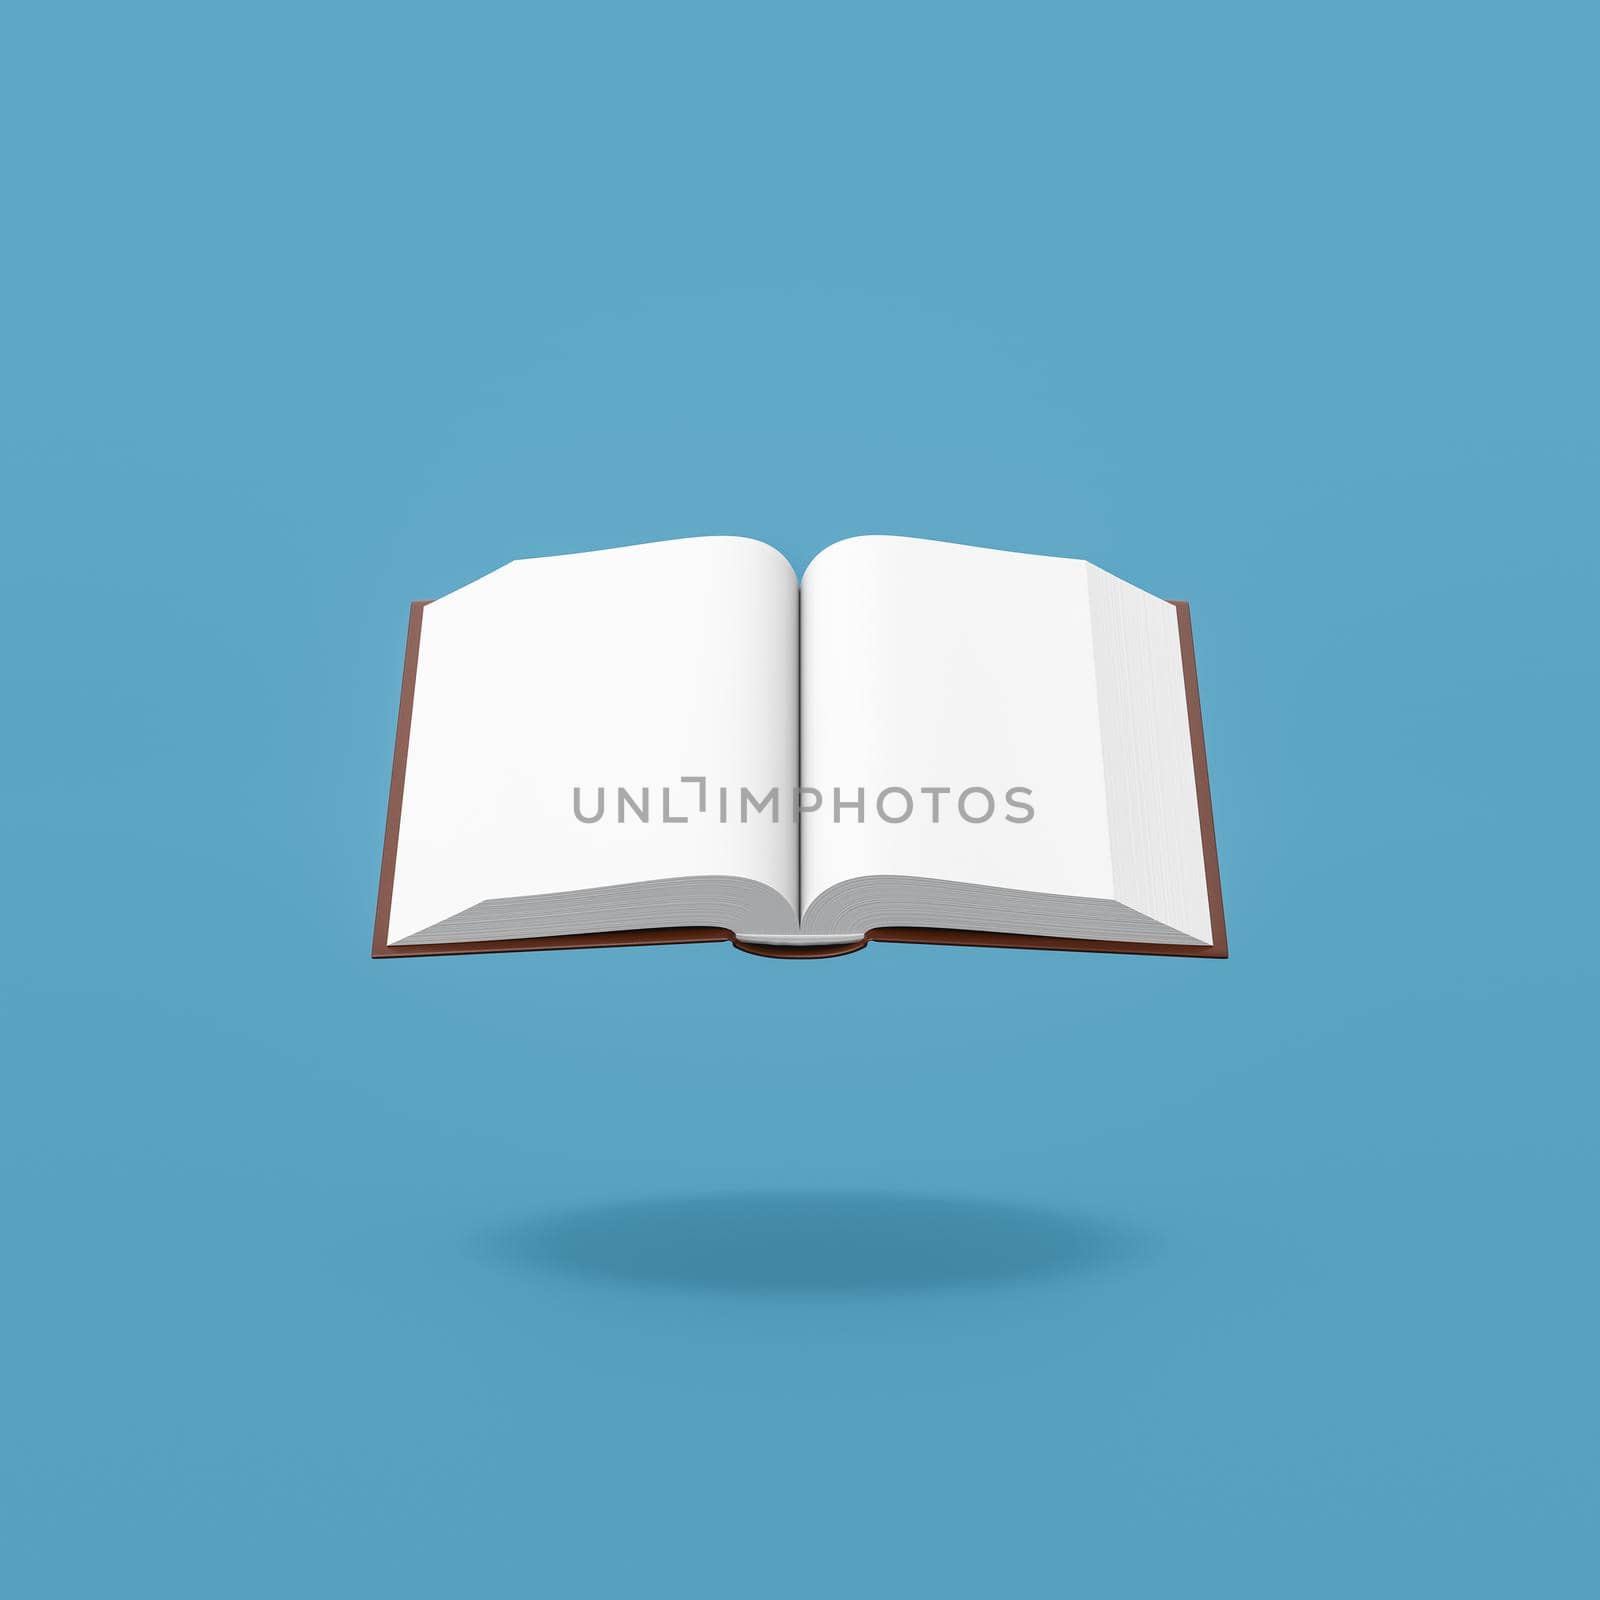 Open Book with Blank Pages Isolated on Flat Blue Background with Shadow 3D Illustration